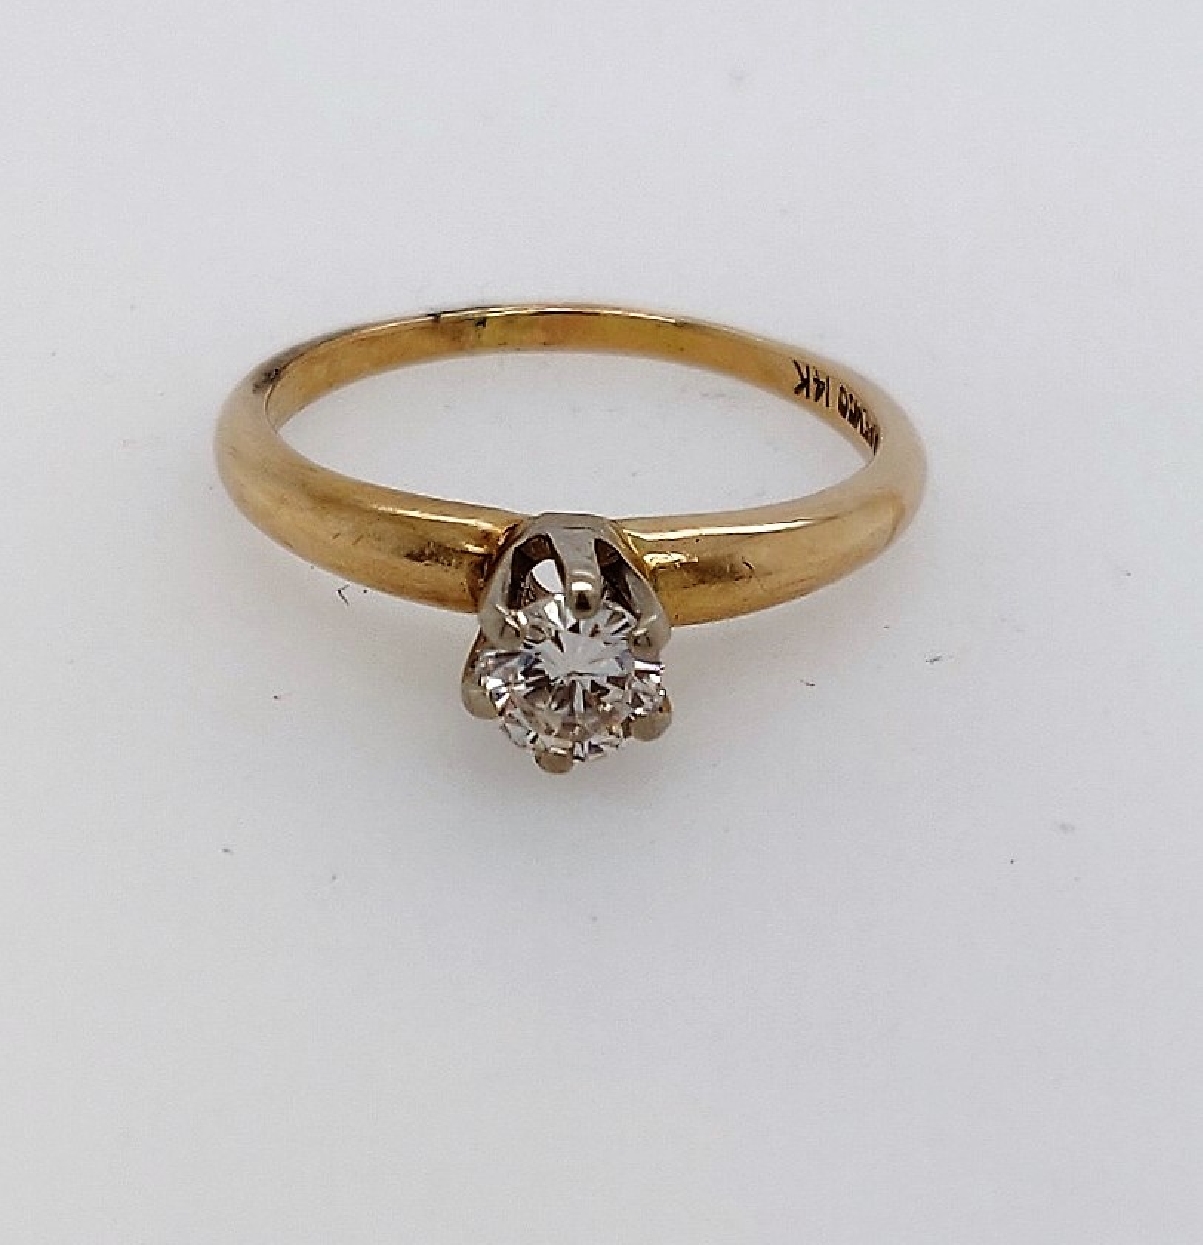 14k yellow gold vintage solitaire engagement ring 
0.36 CT 
K; VS-1

size 7.25